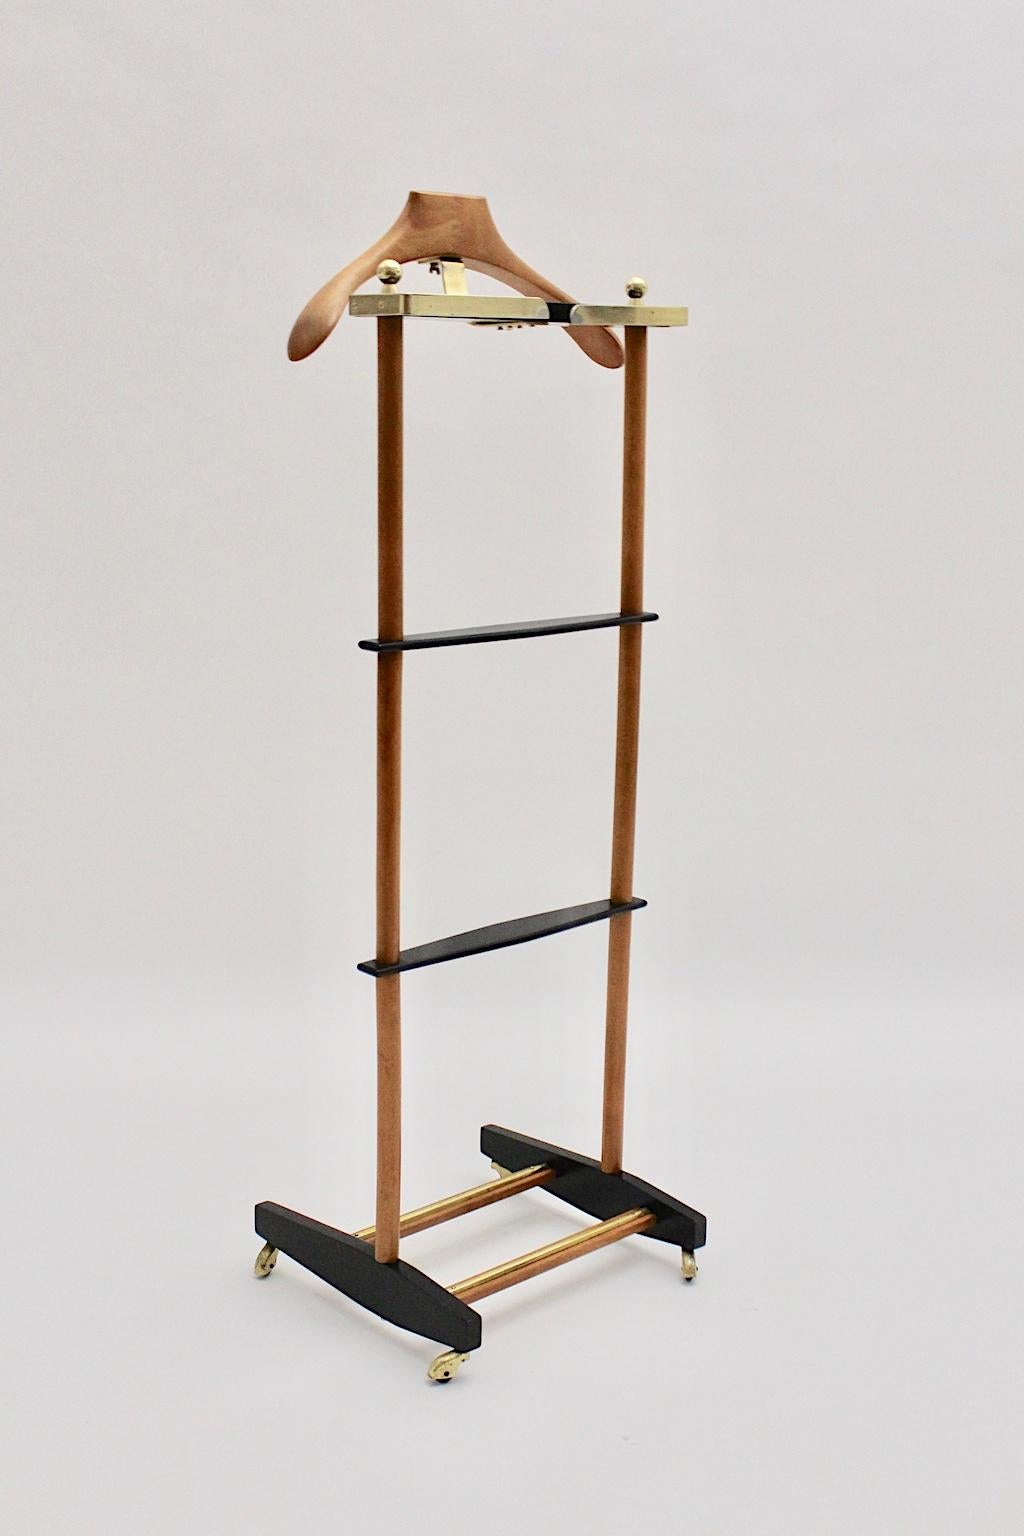  Mid-Century Modern vintage brass beech valet attributed to Ico & Luisa Parisi, circa 1960 Italy, while it was executed by Fratelli Reguitti Brevettato Italy.
The useful and beautiful gentlemen valet was made of beechwood clear lacquered and partly